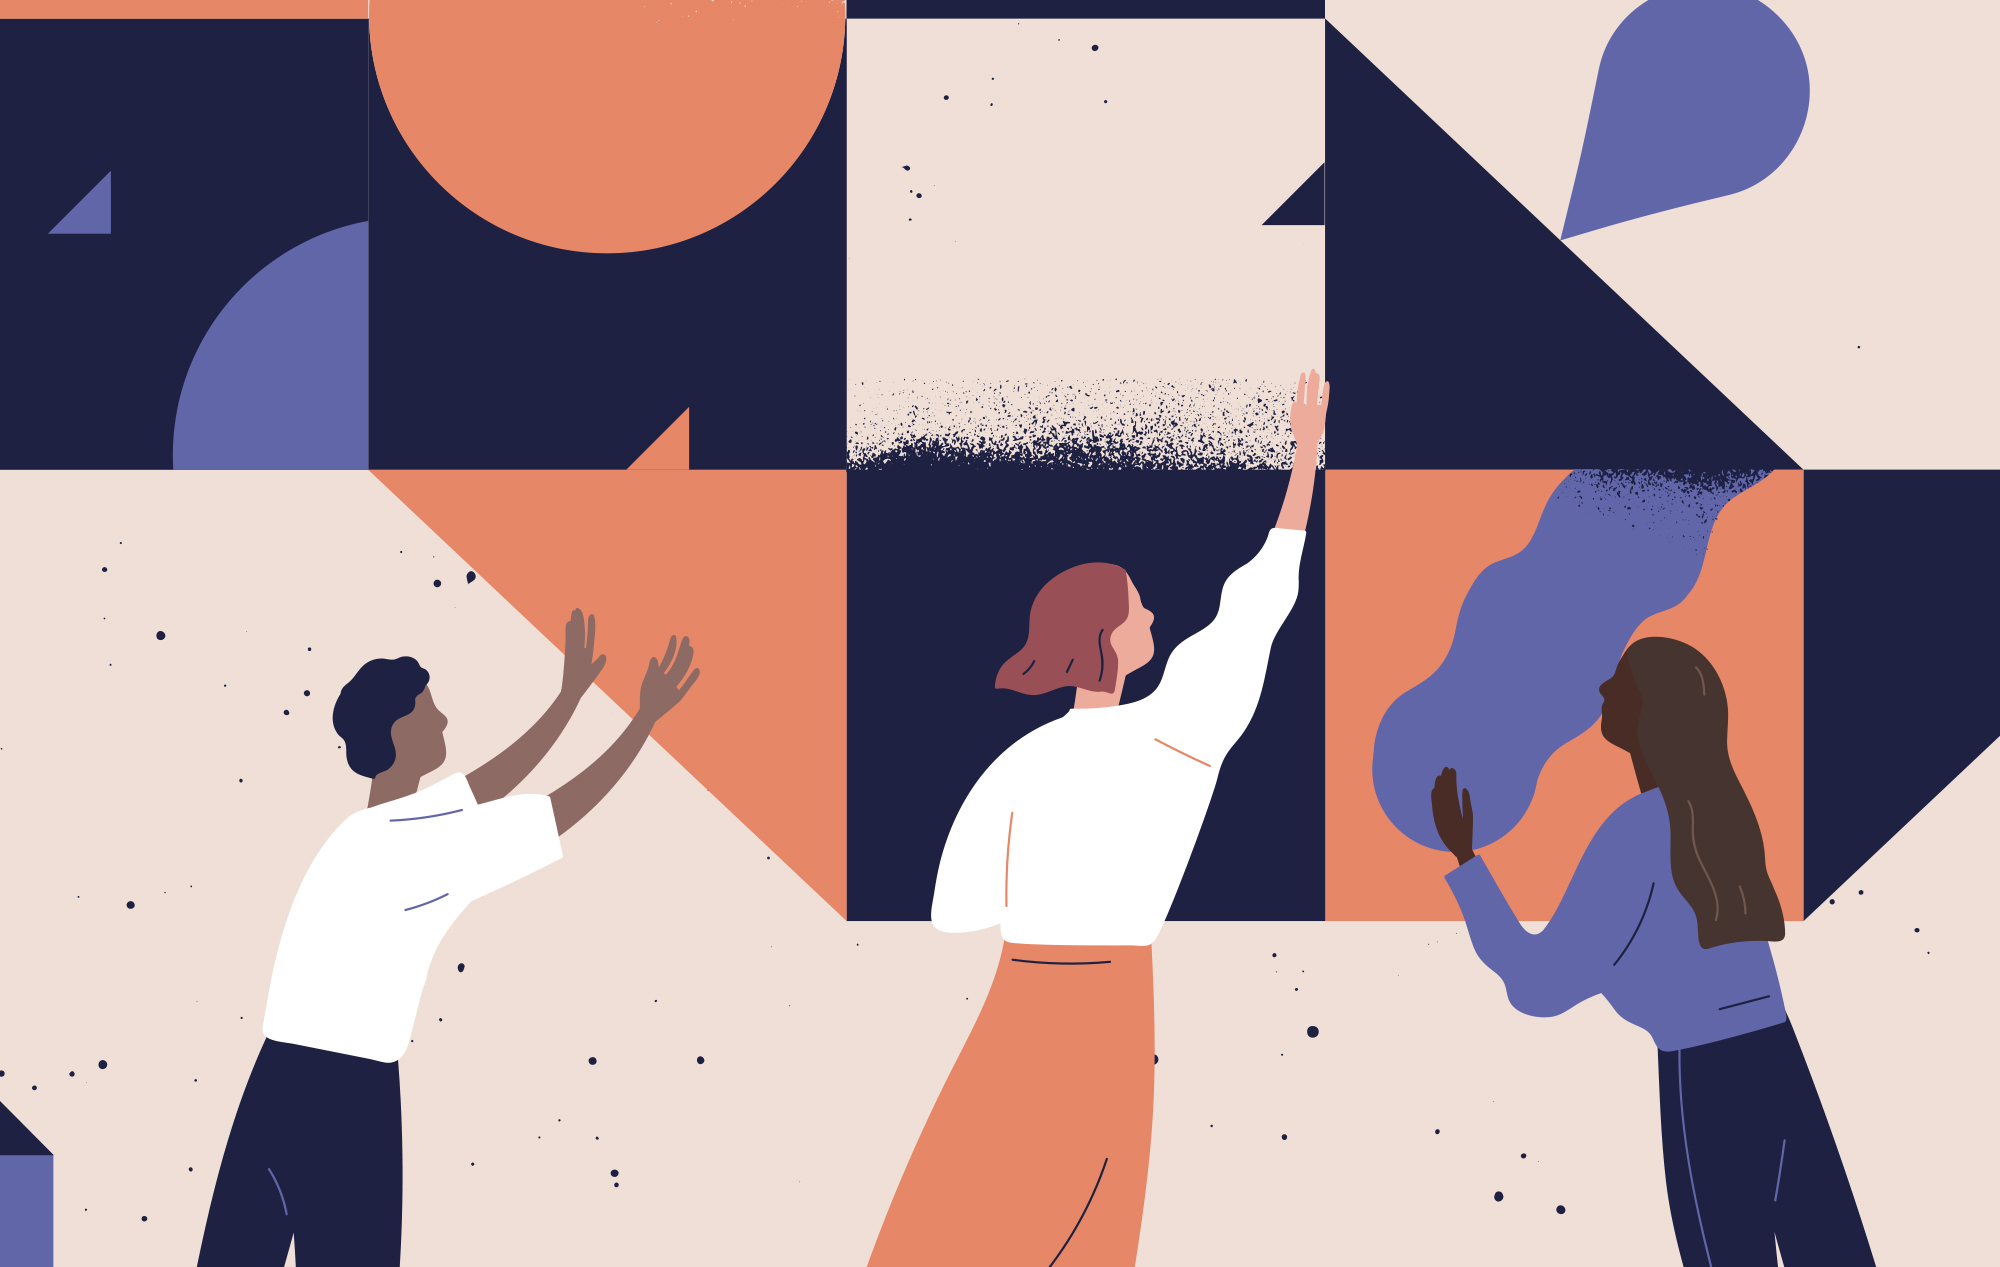 Illustration of three people reaching towards abstract shapes, symbolizing teamwork.